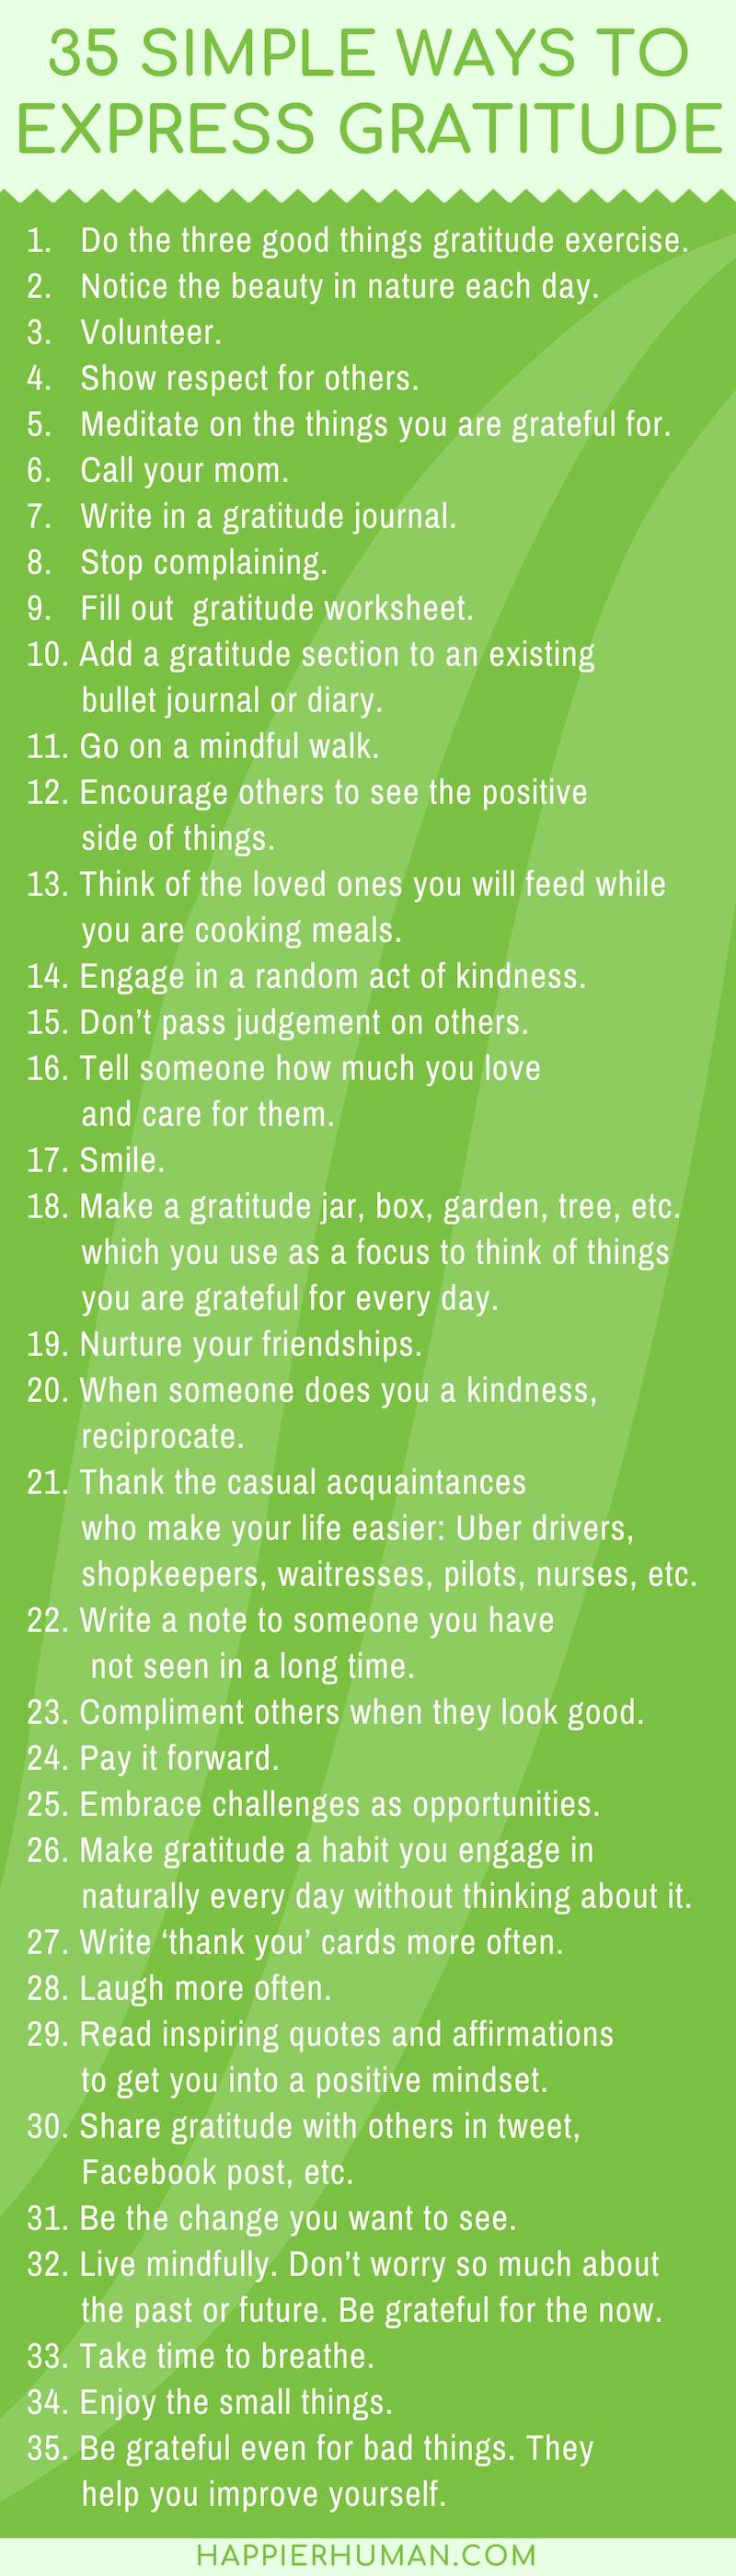 Here are a few simple ideas on how you can express gratitude. #gratitude #happiness #selfcare #selfhelp #selflove #inspiration #motivation #mentalhealth #confidence #selfimprovement